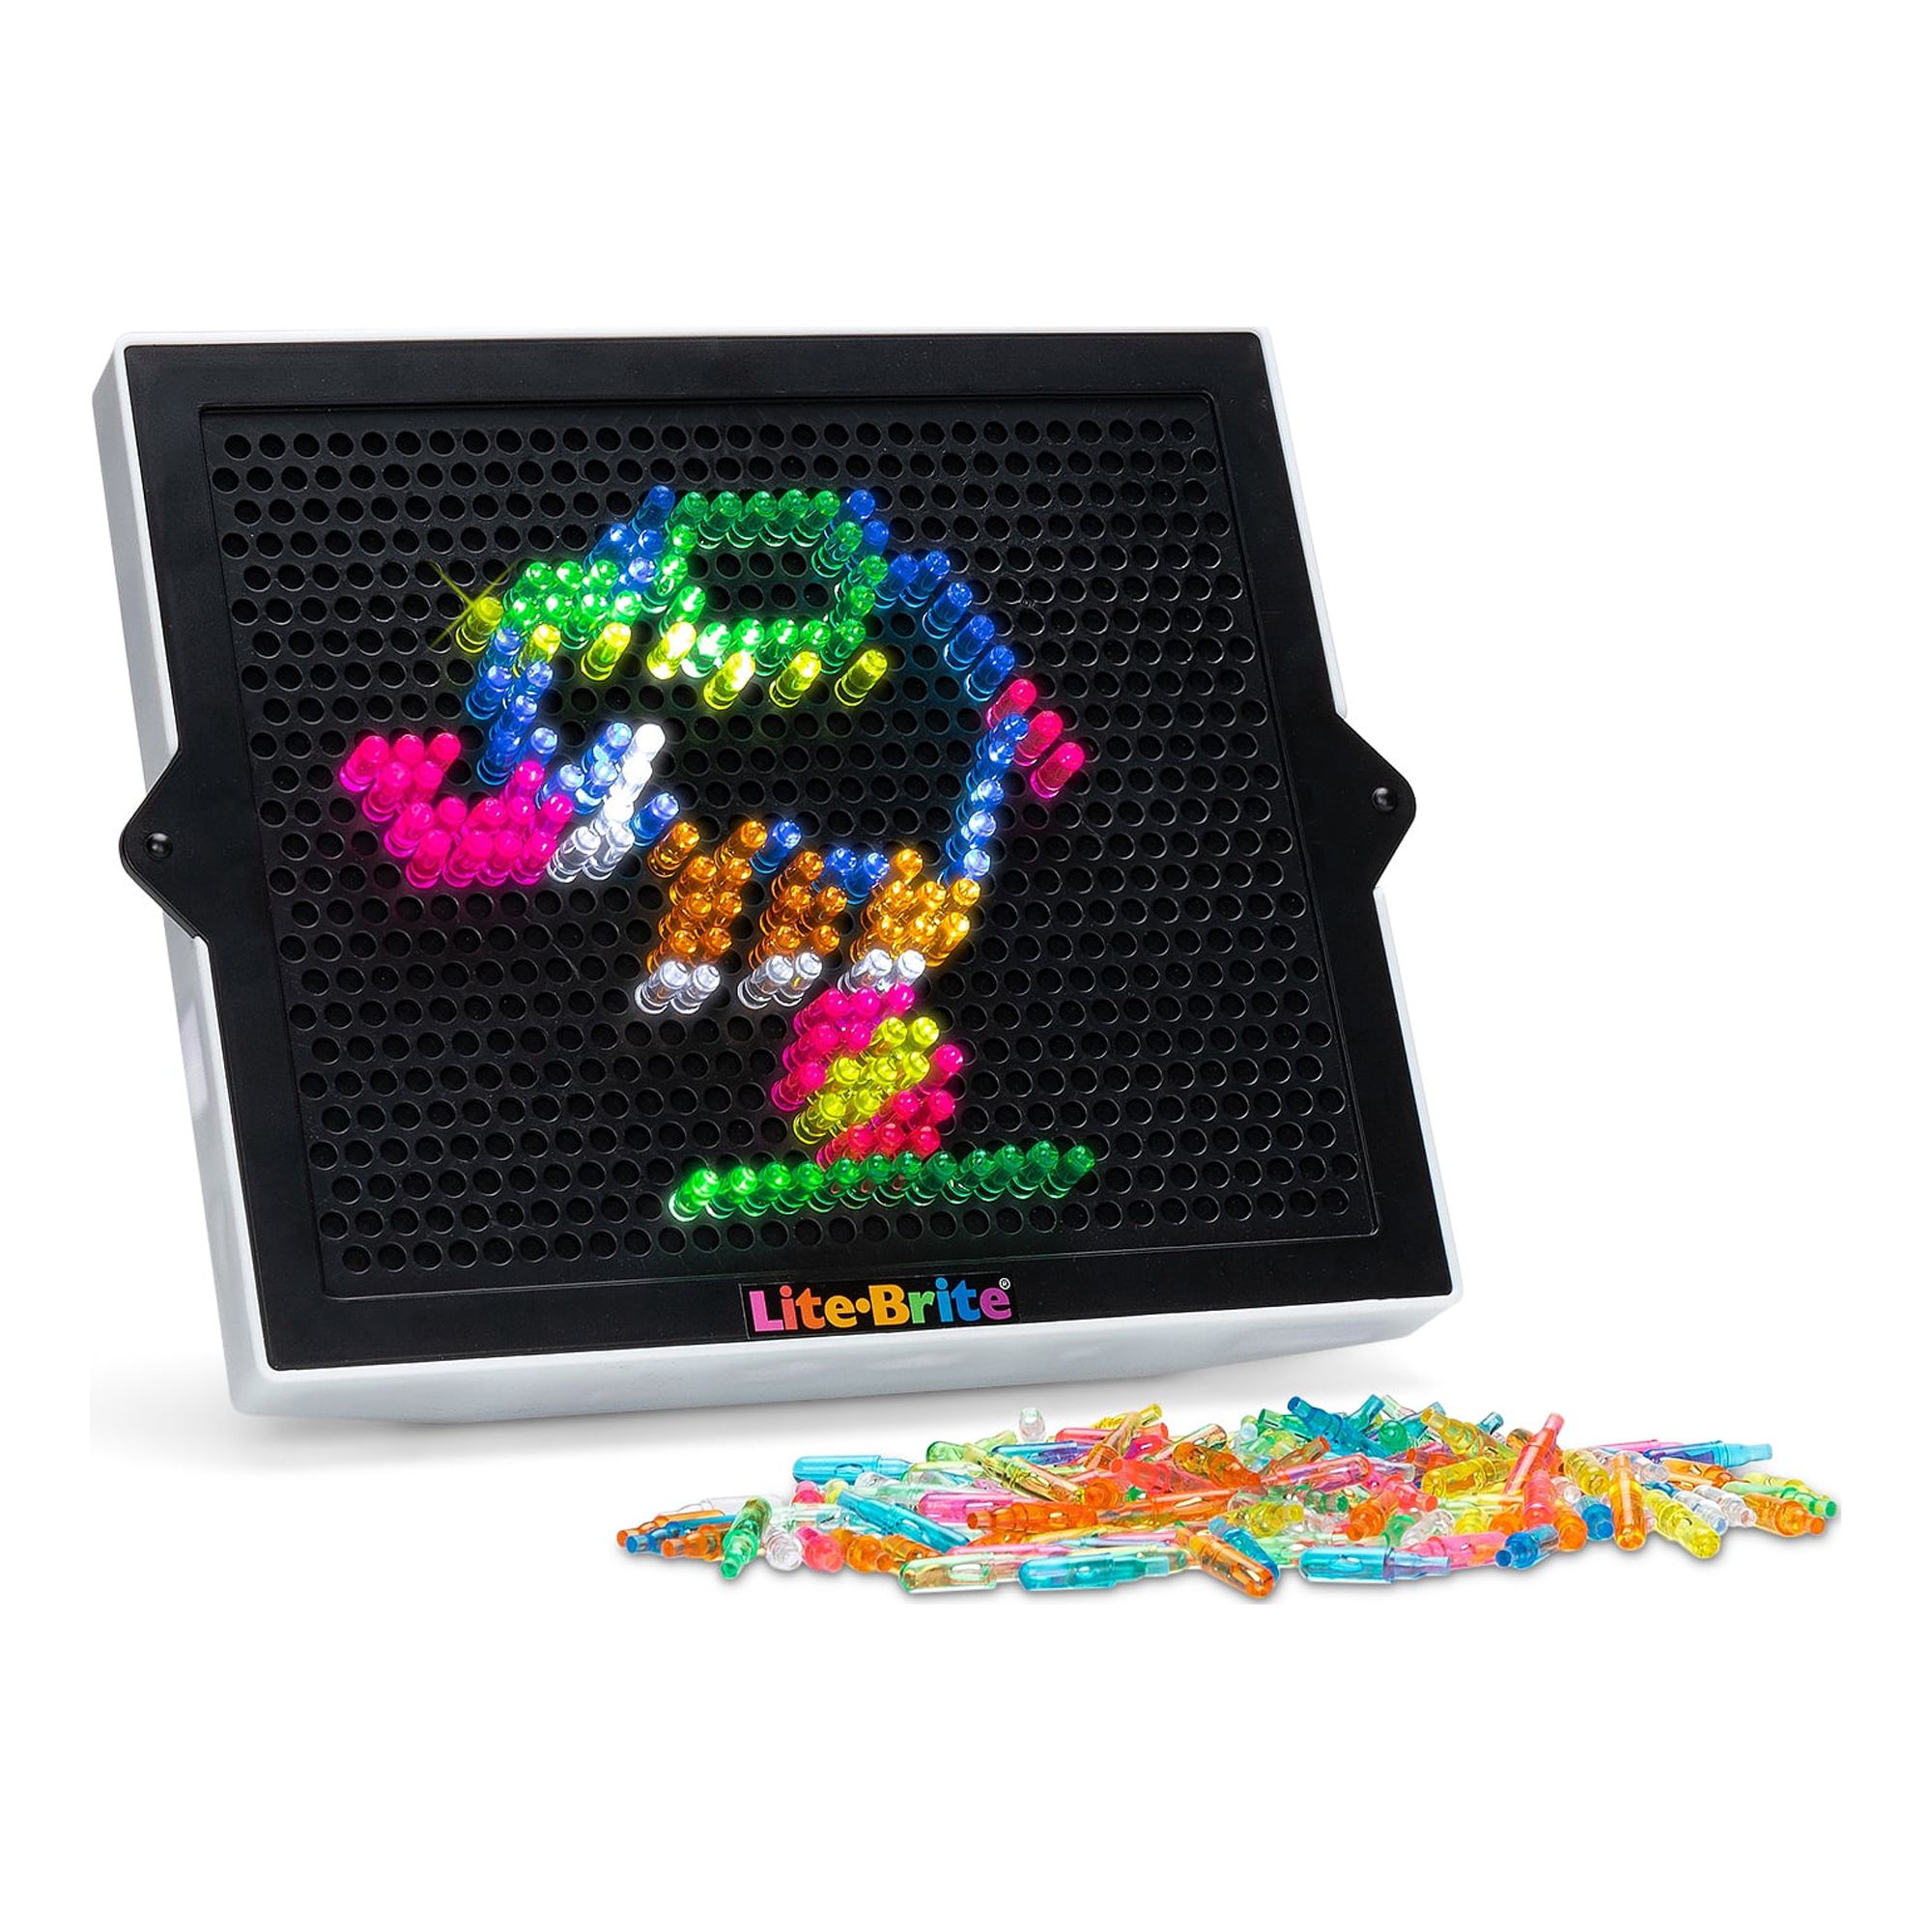 Lite-Brite Classic, Favorite Retro Toy - Create Art with Light, STEM, Educational Learning, Holiday, Birthday, Gift, Boys, Unisex, Kid, Toddler, Girls Age 4+ - image 2 of 10